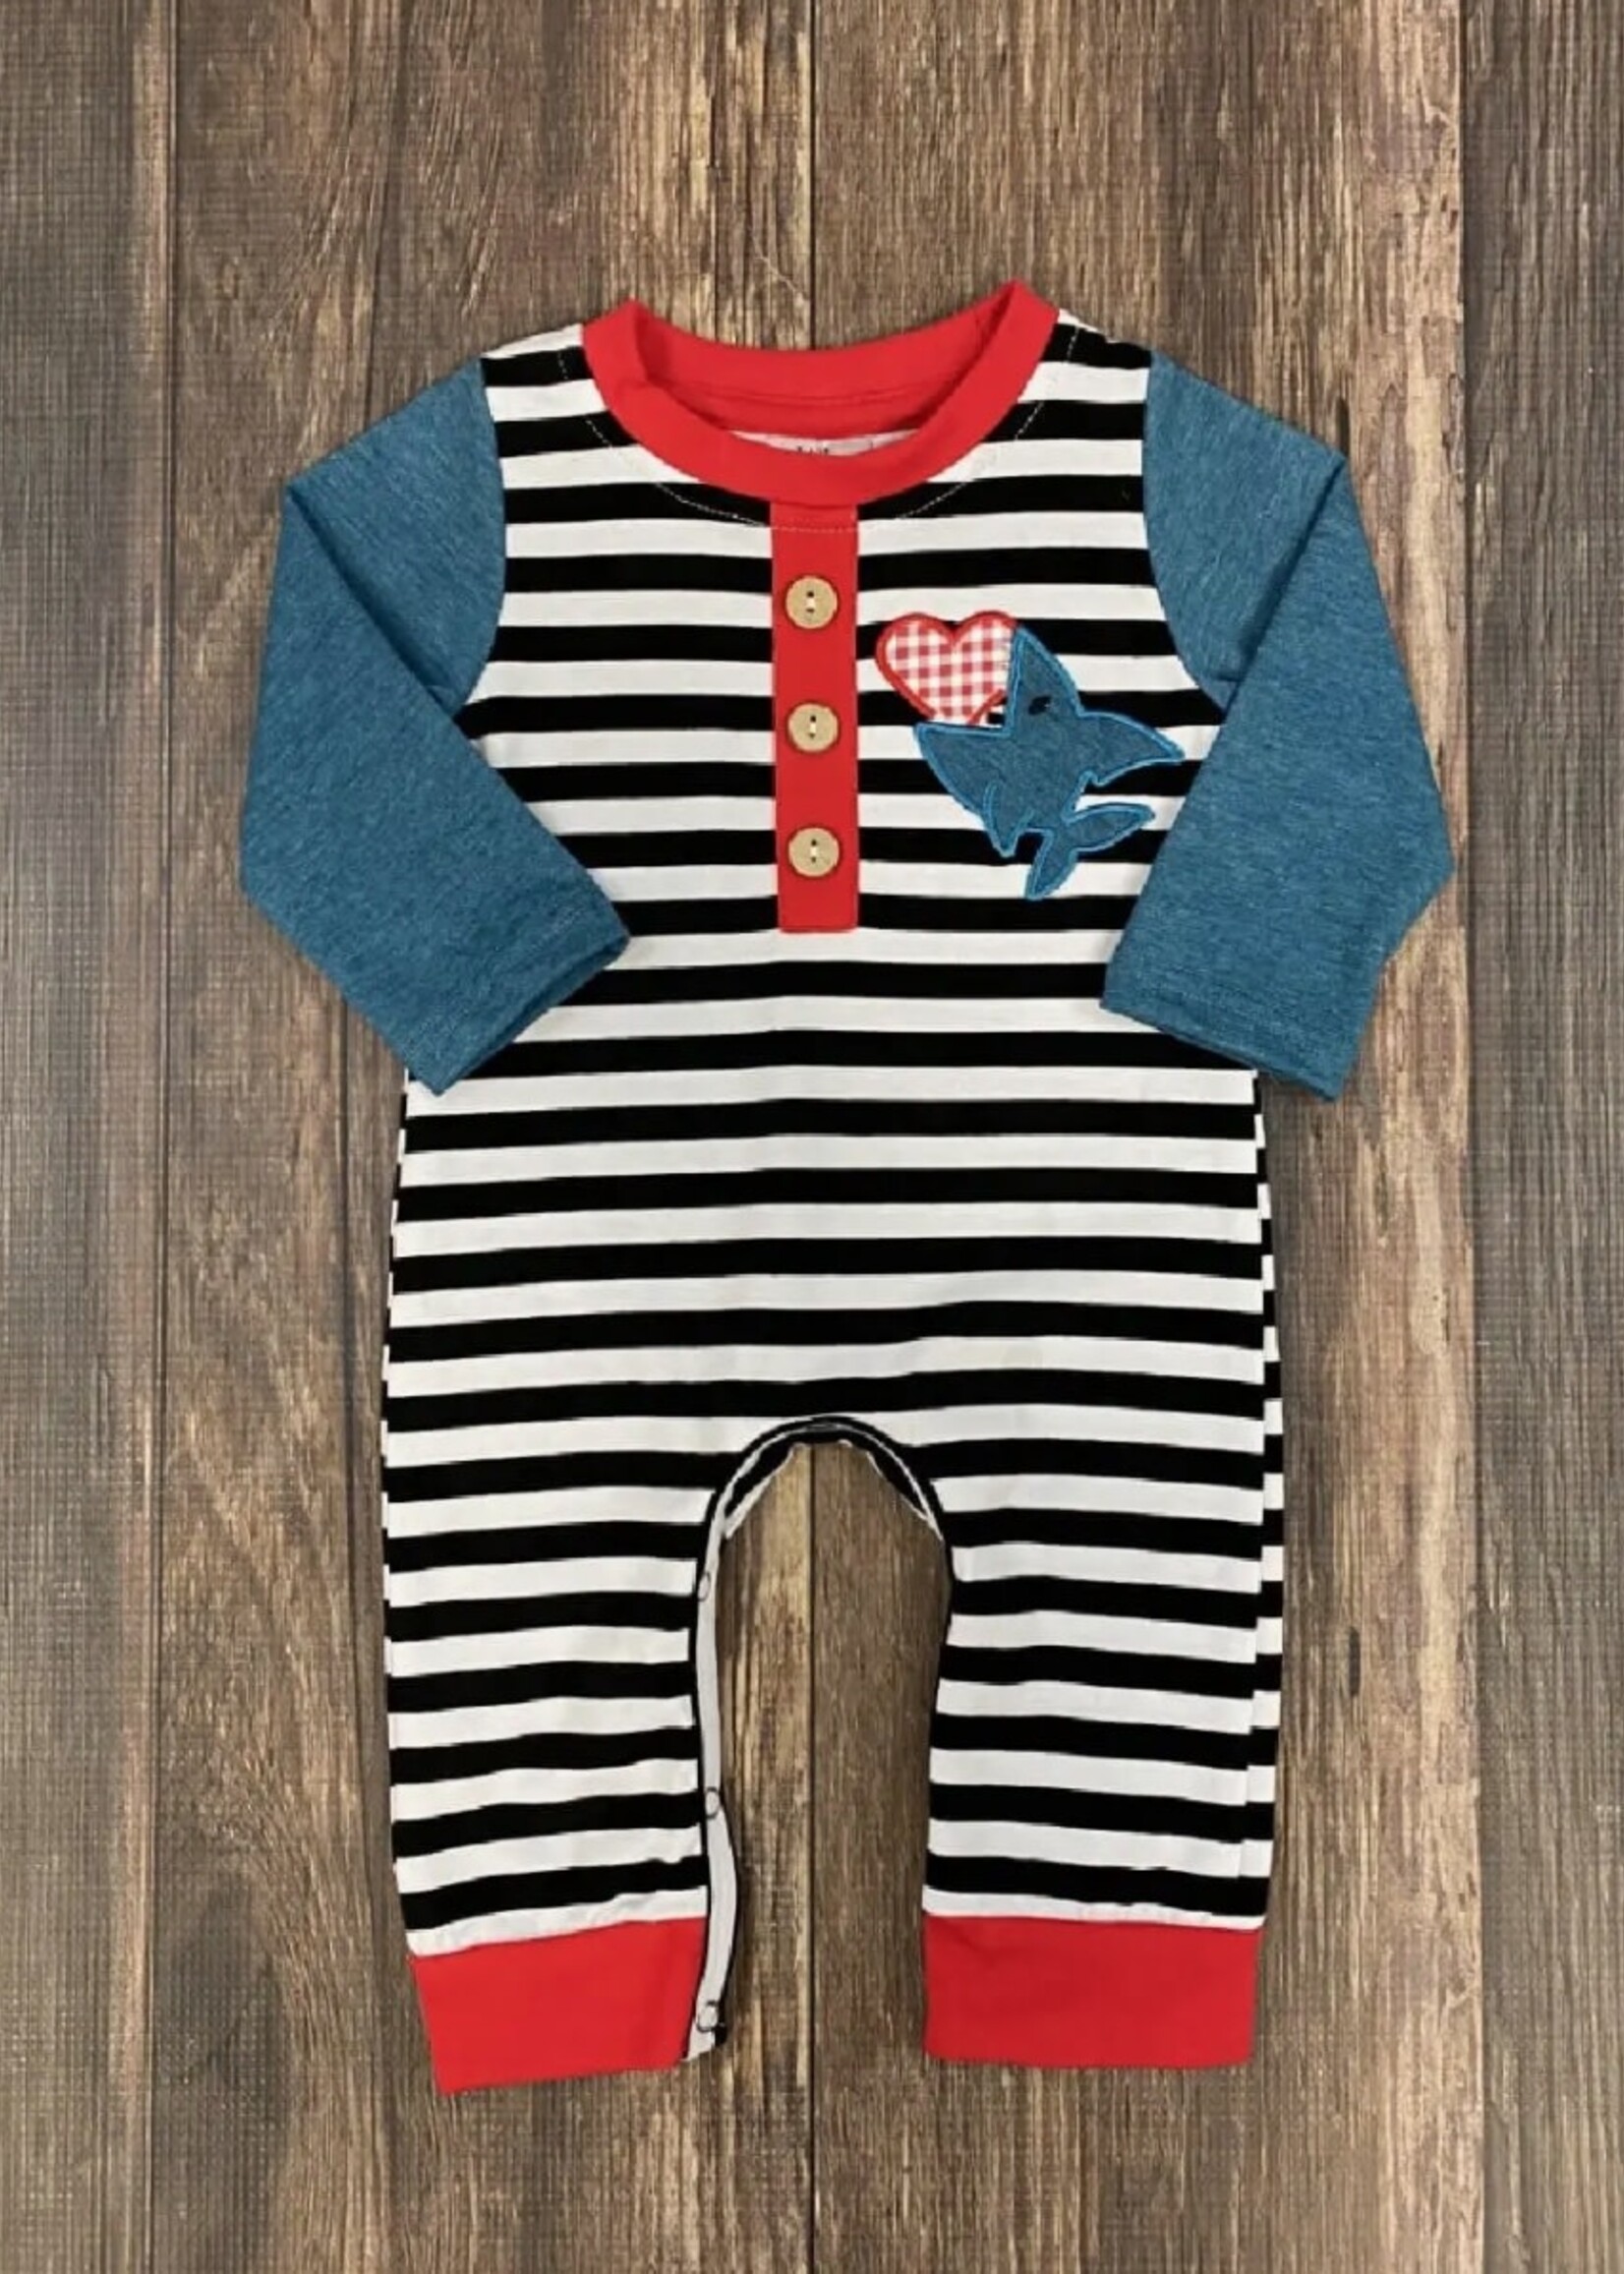 The Hair Bow Company Boy's Valentines Shark Striped Romper